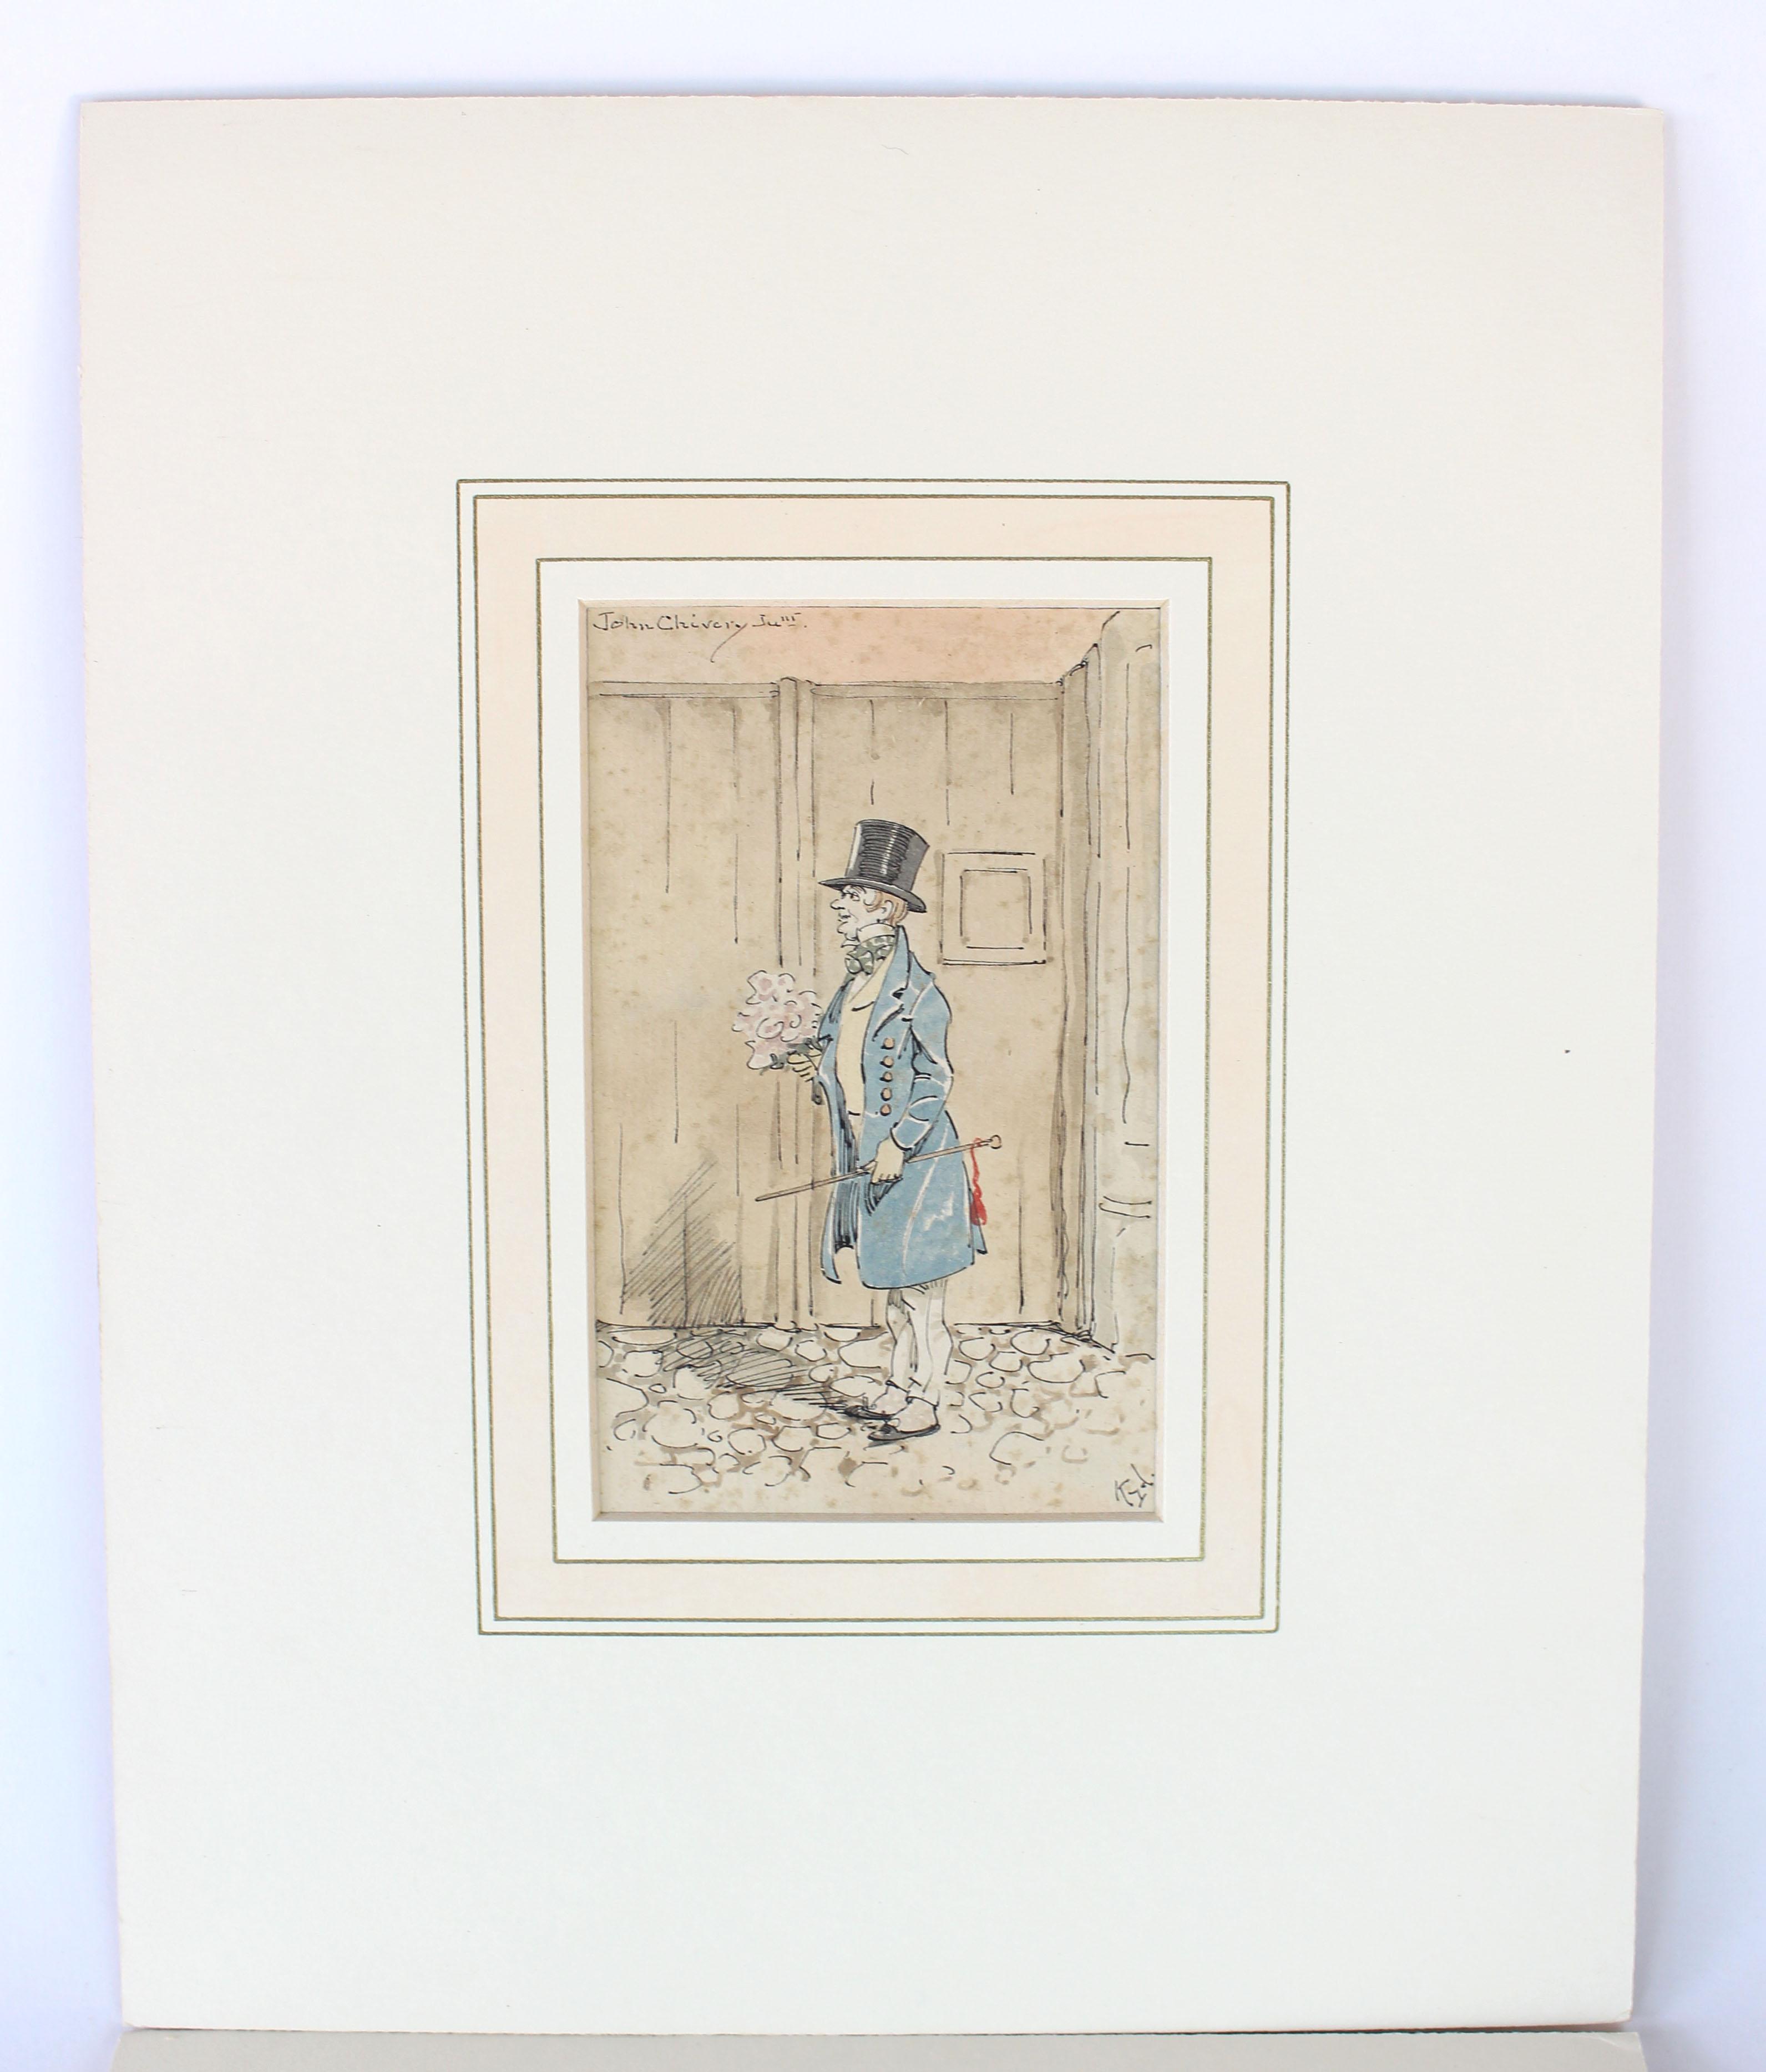 Lot of Four Original Watercolor Illustrations by Joseph Clayton Clarke for Charles Dickins